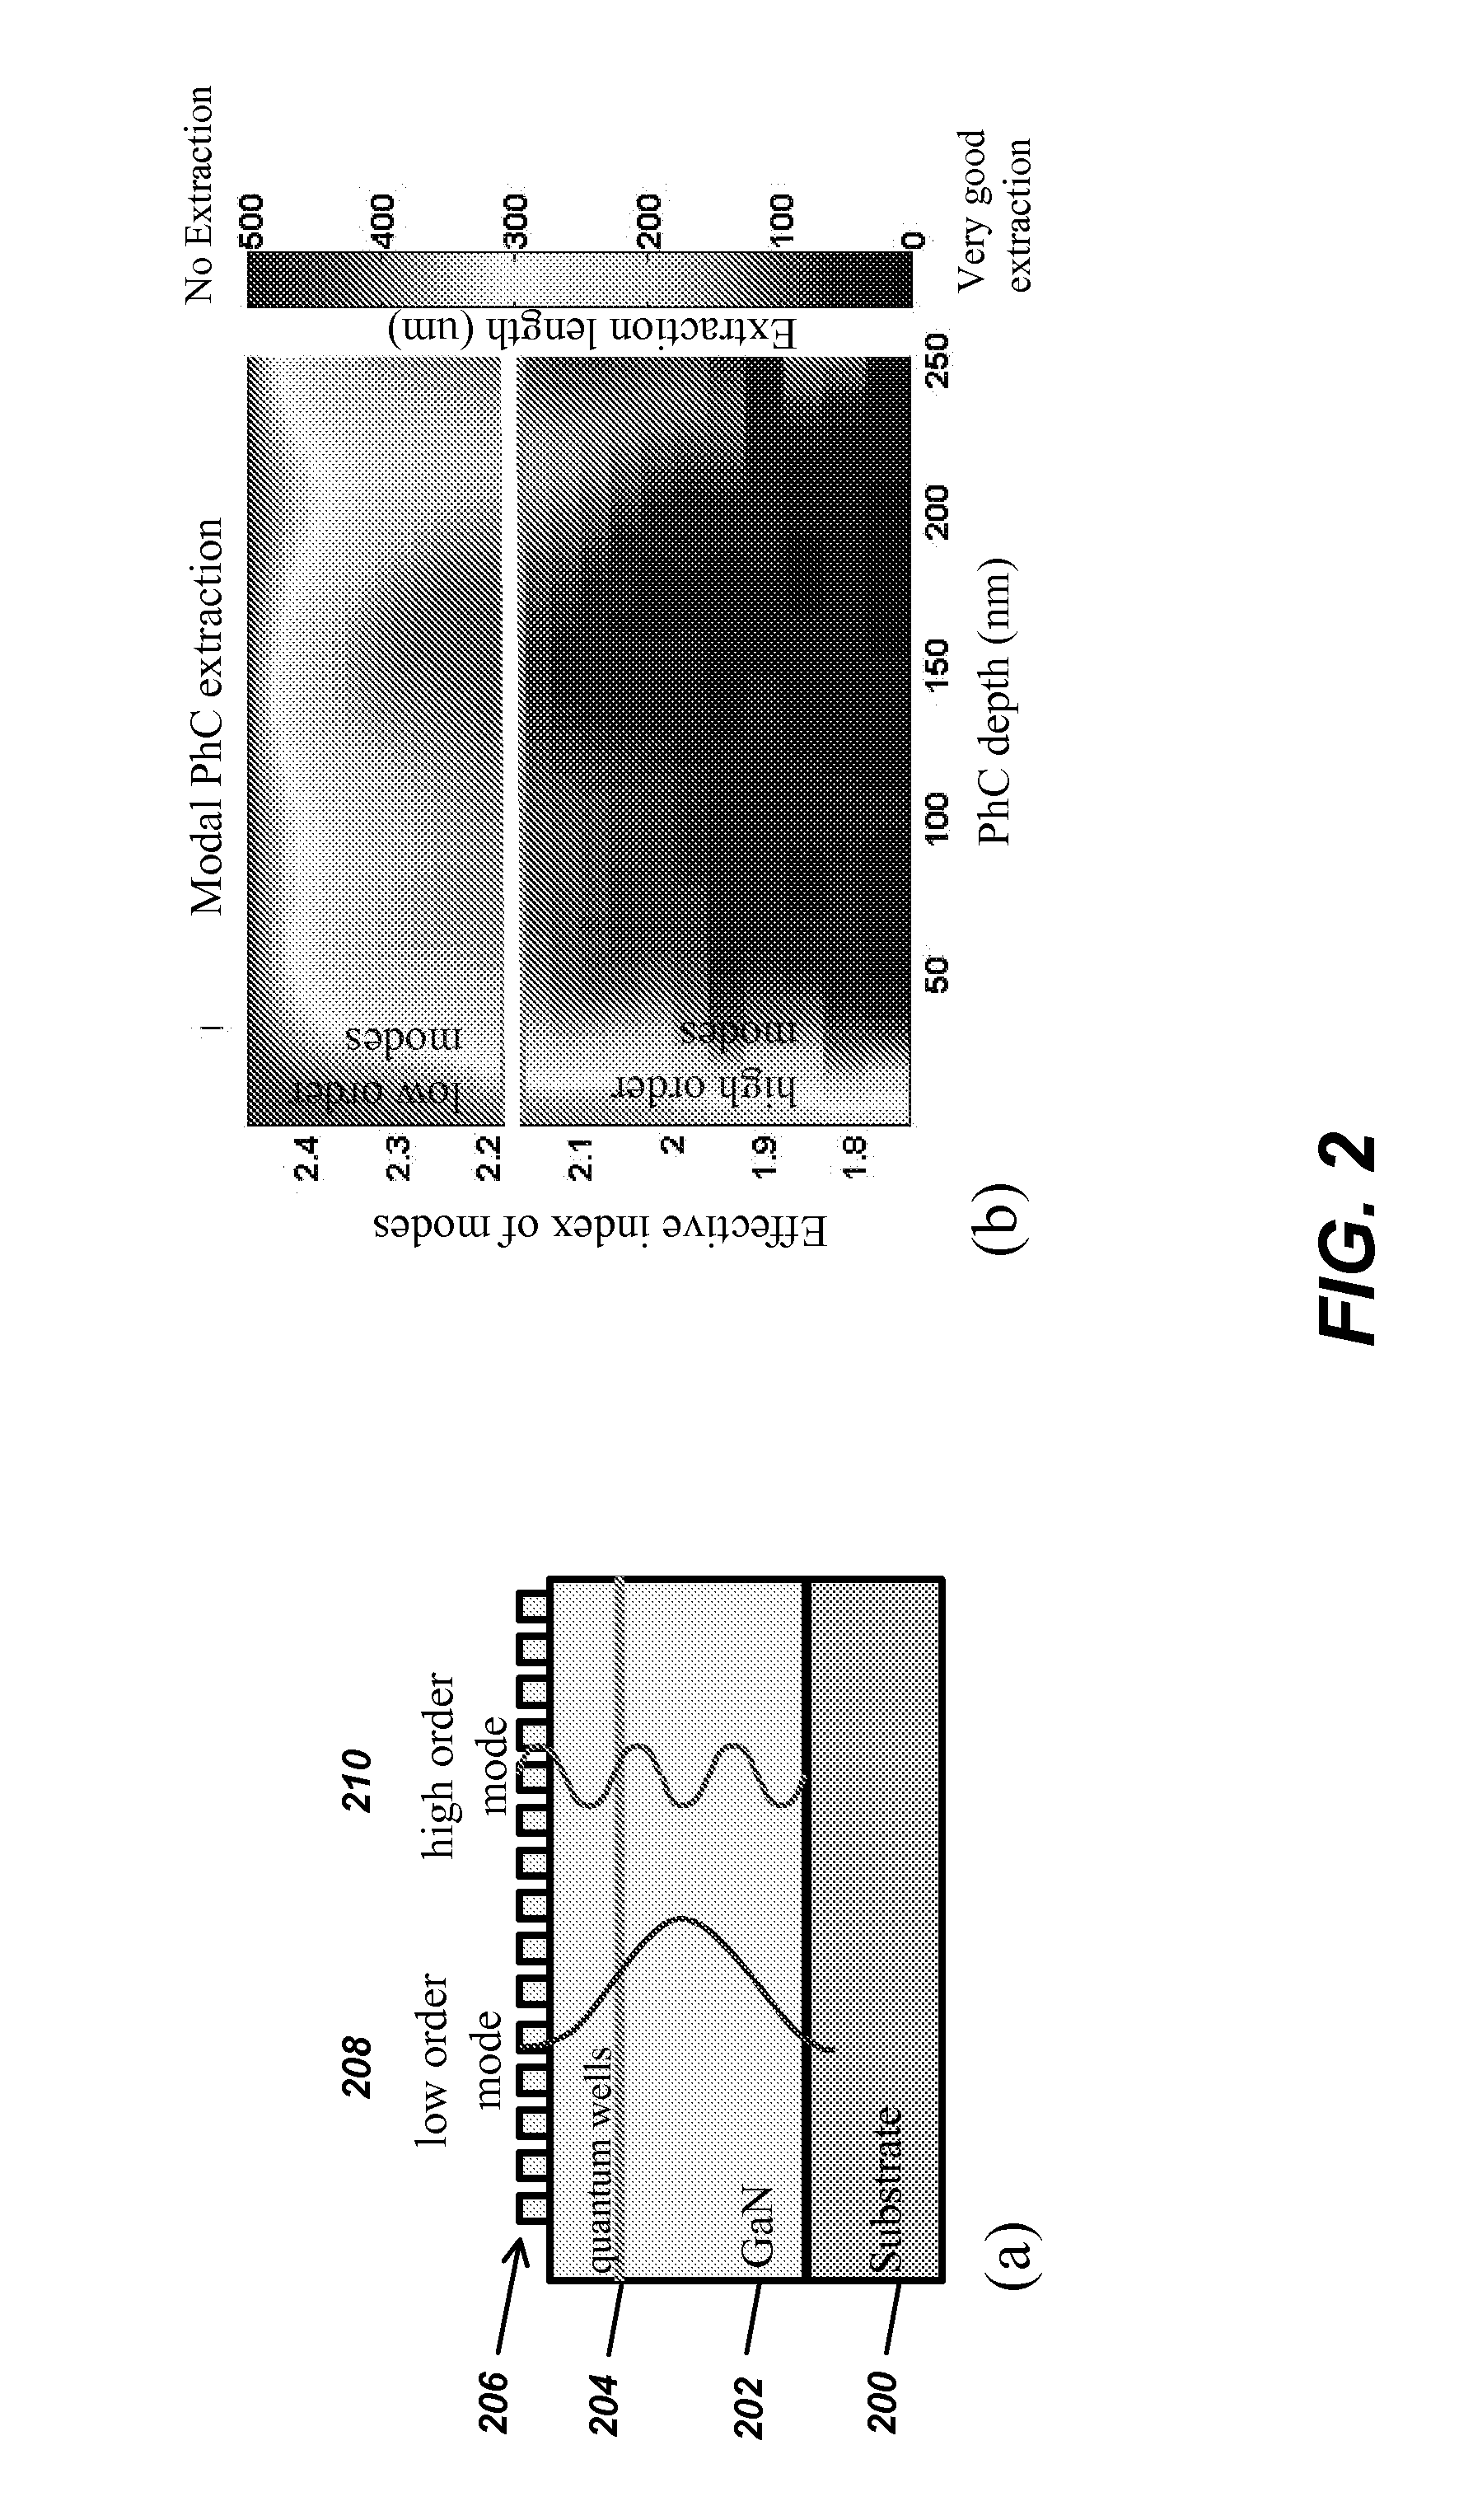 Optoelectronic devices with embedded void structures